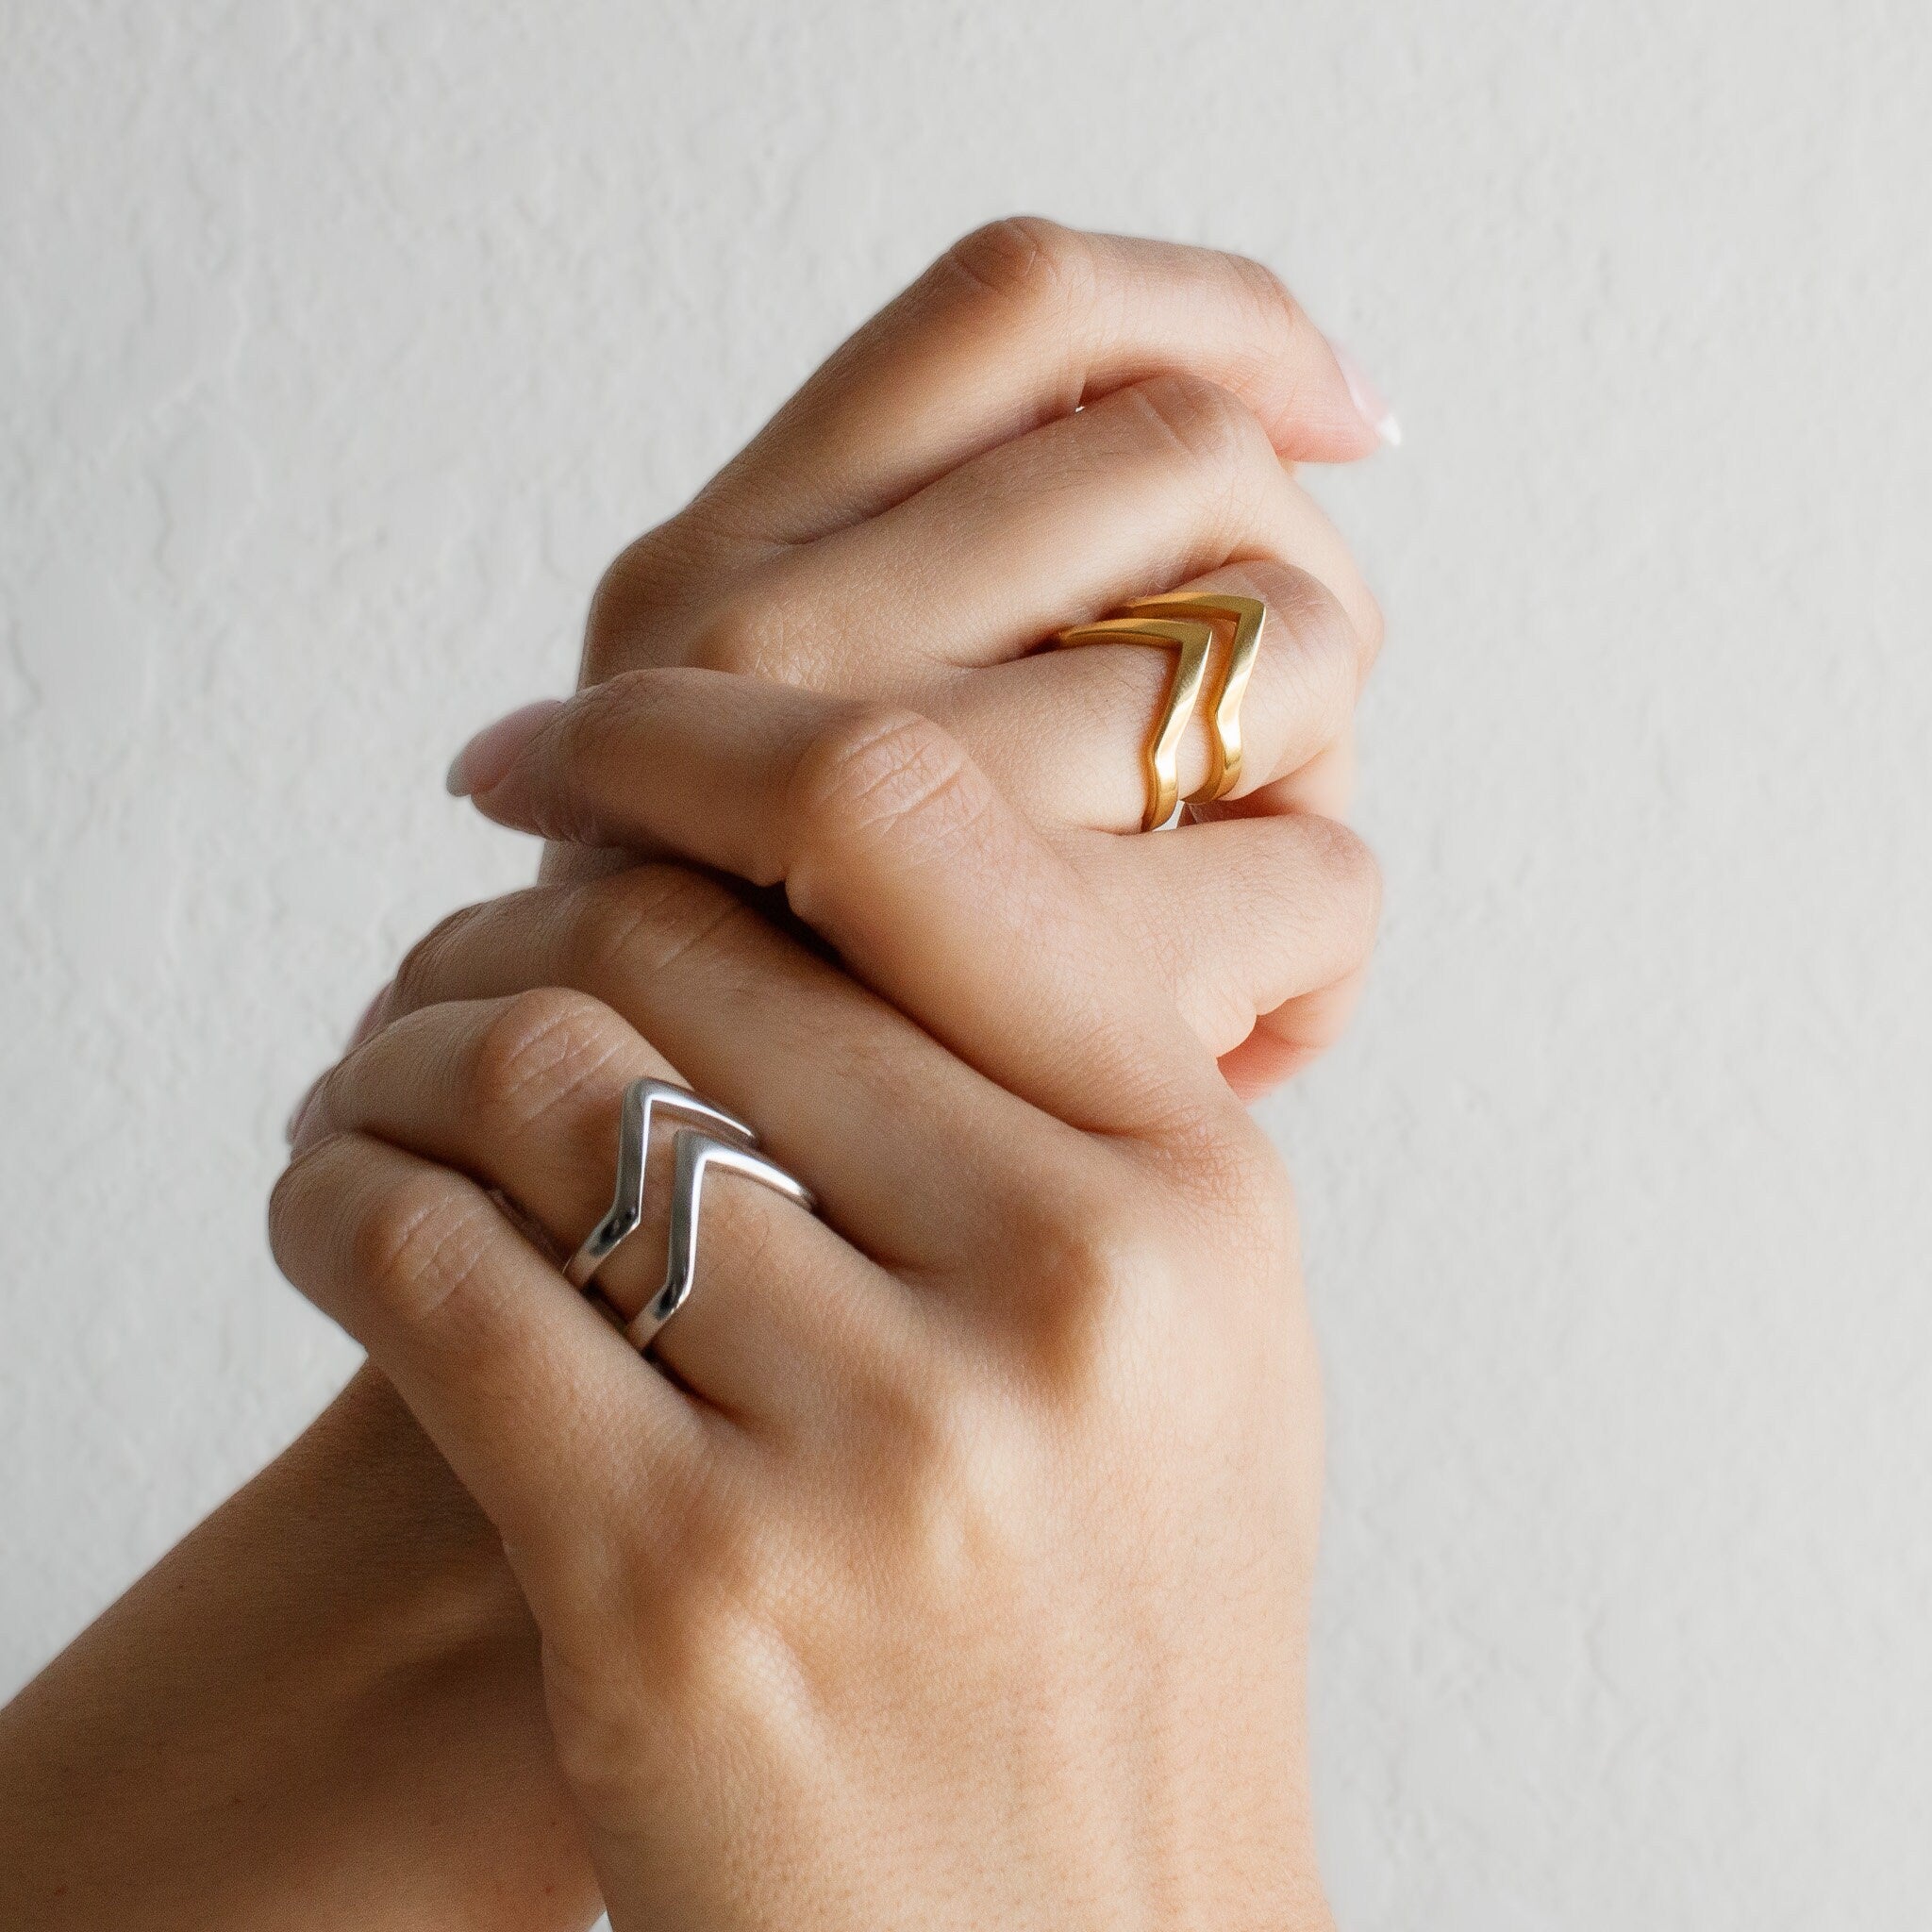 Geometric Chevron Ring - Gift for her - Mom and Daughter ring - Women ring Birthday present